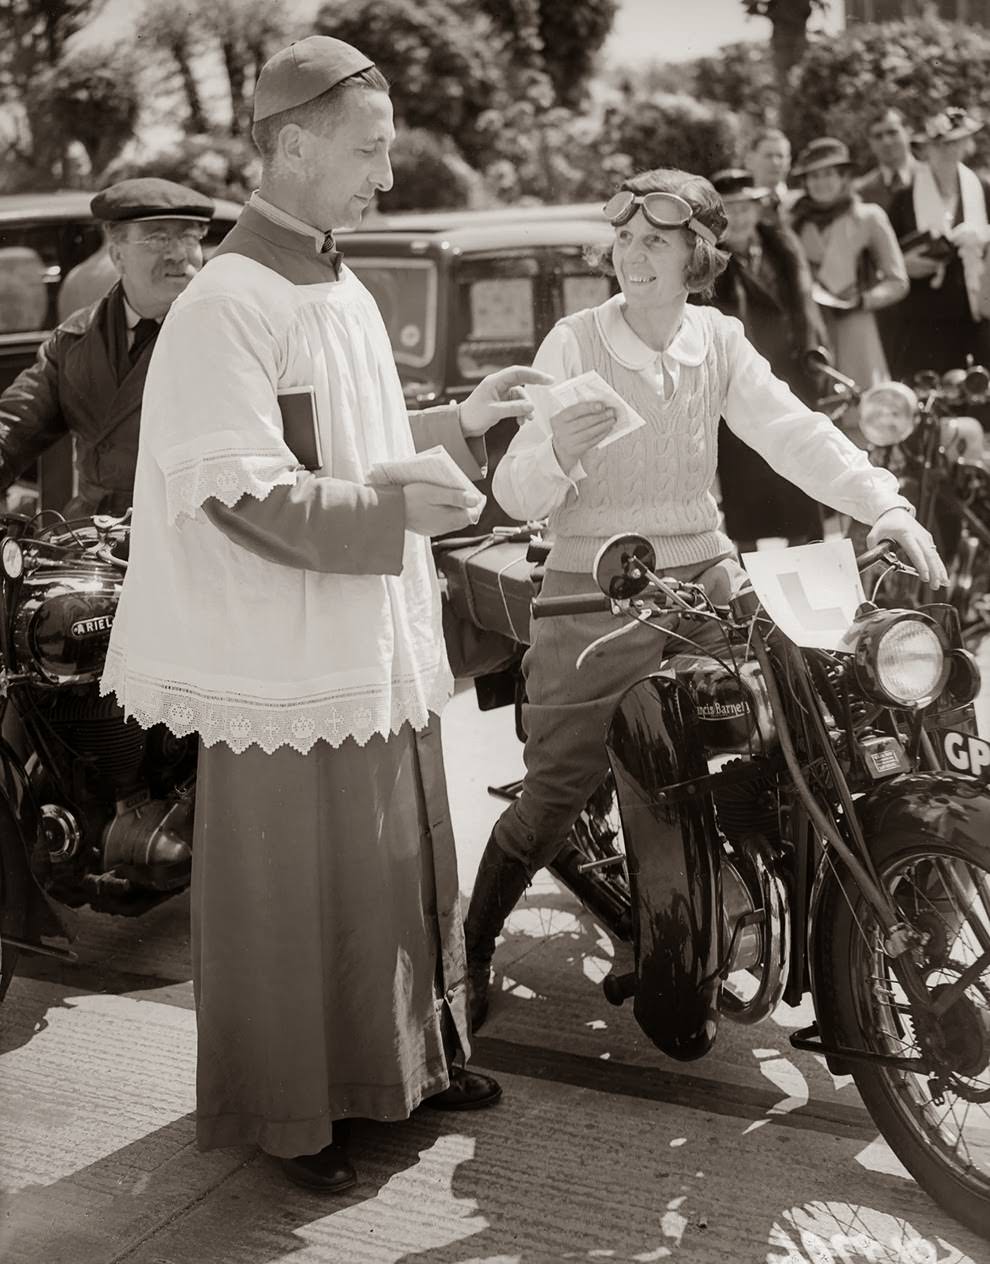 A reverend blesses the motorcycle of a woman who is learning to drive, 1938.